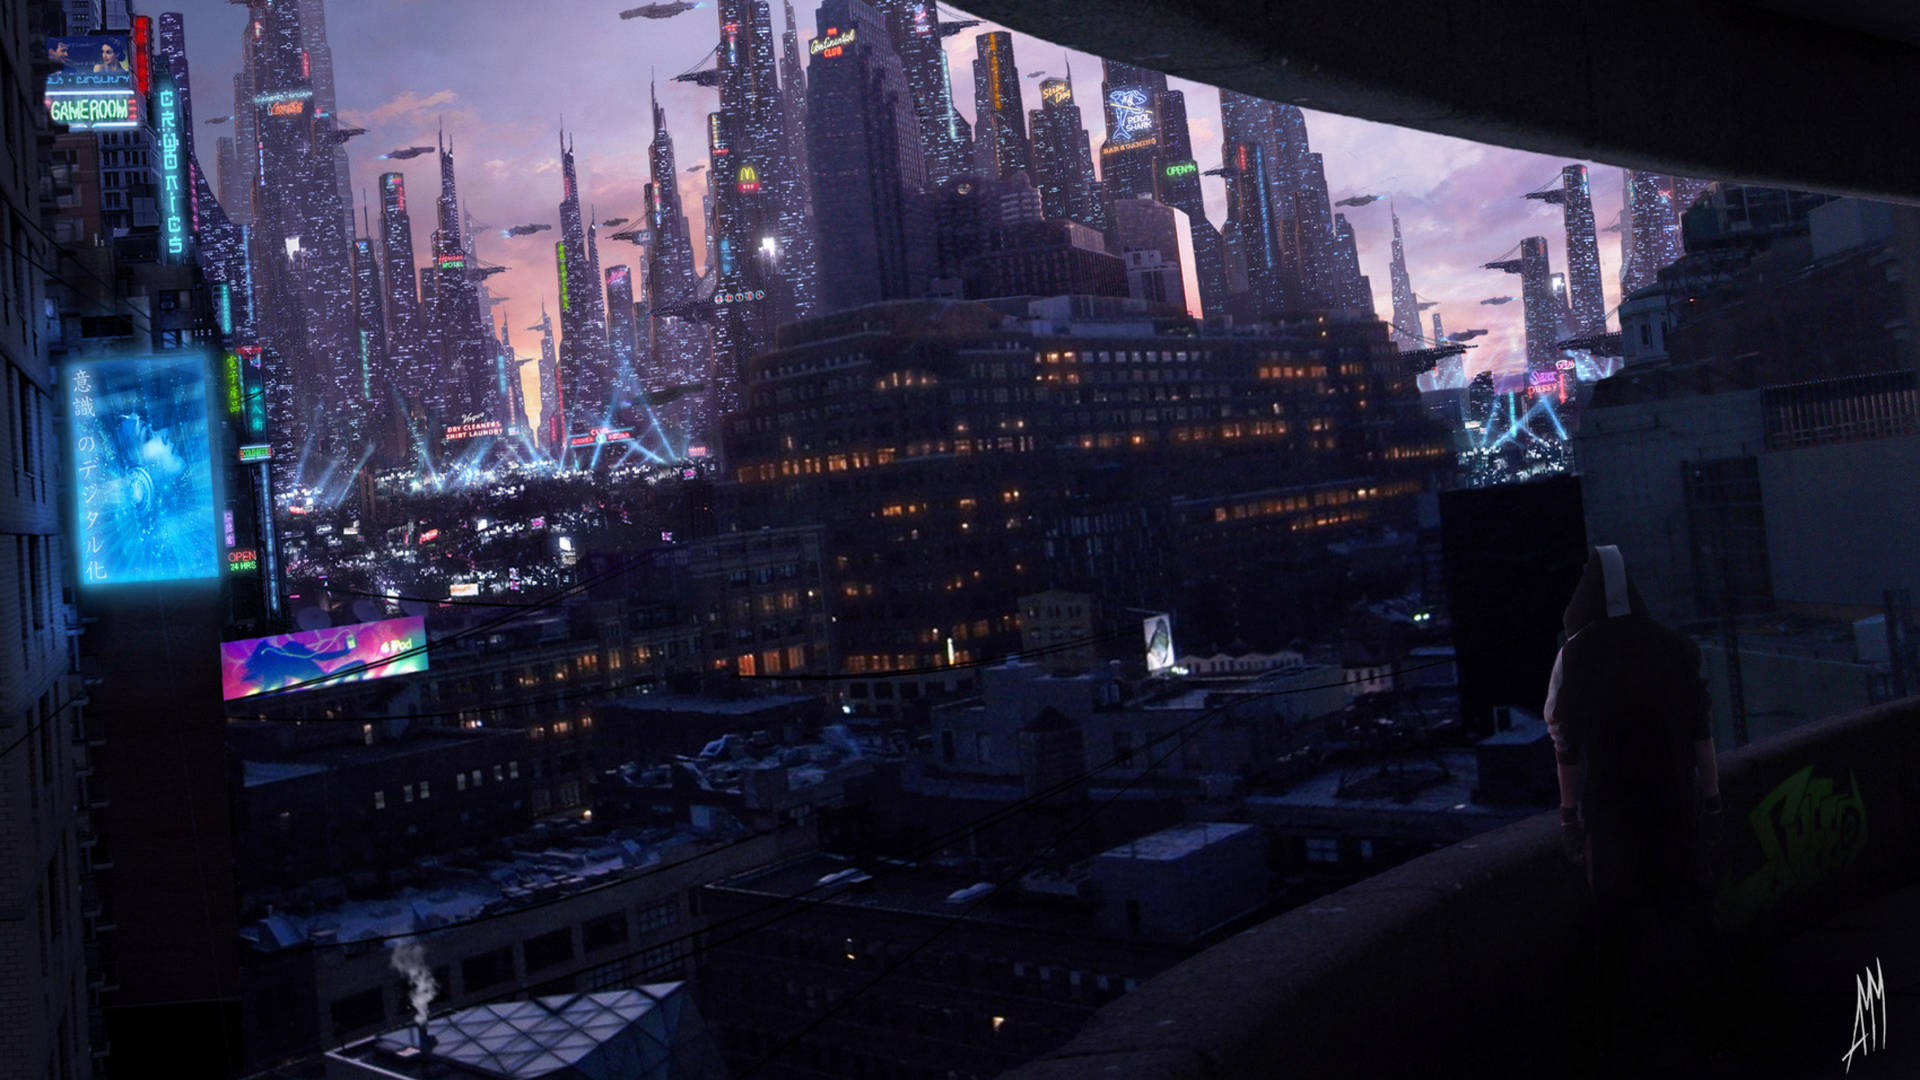 Explore the cyber-future: A Look at the Towers and High-Tech of Cyberpunk Wallpaper